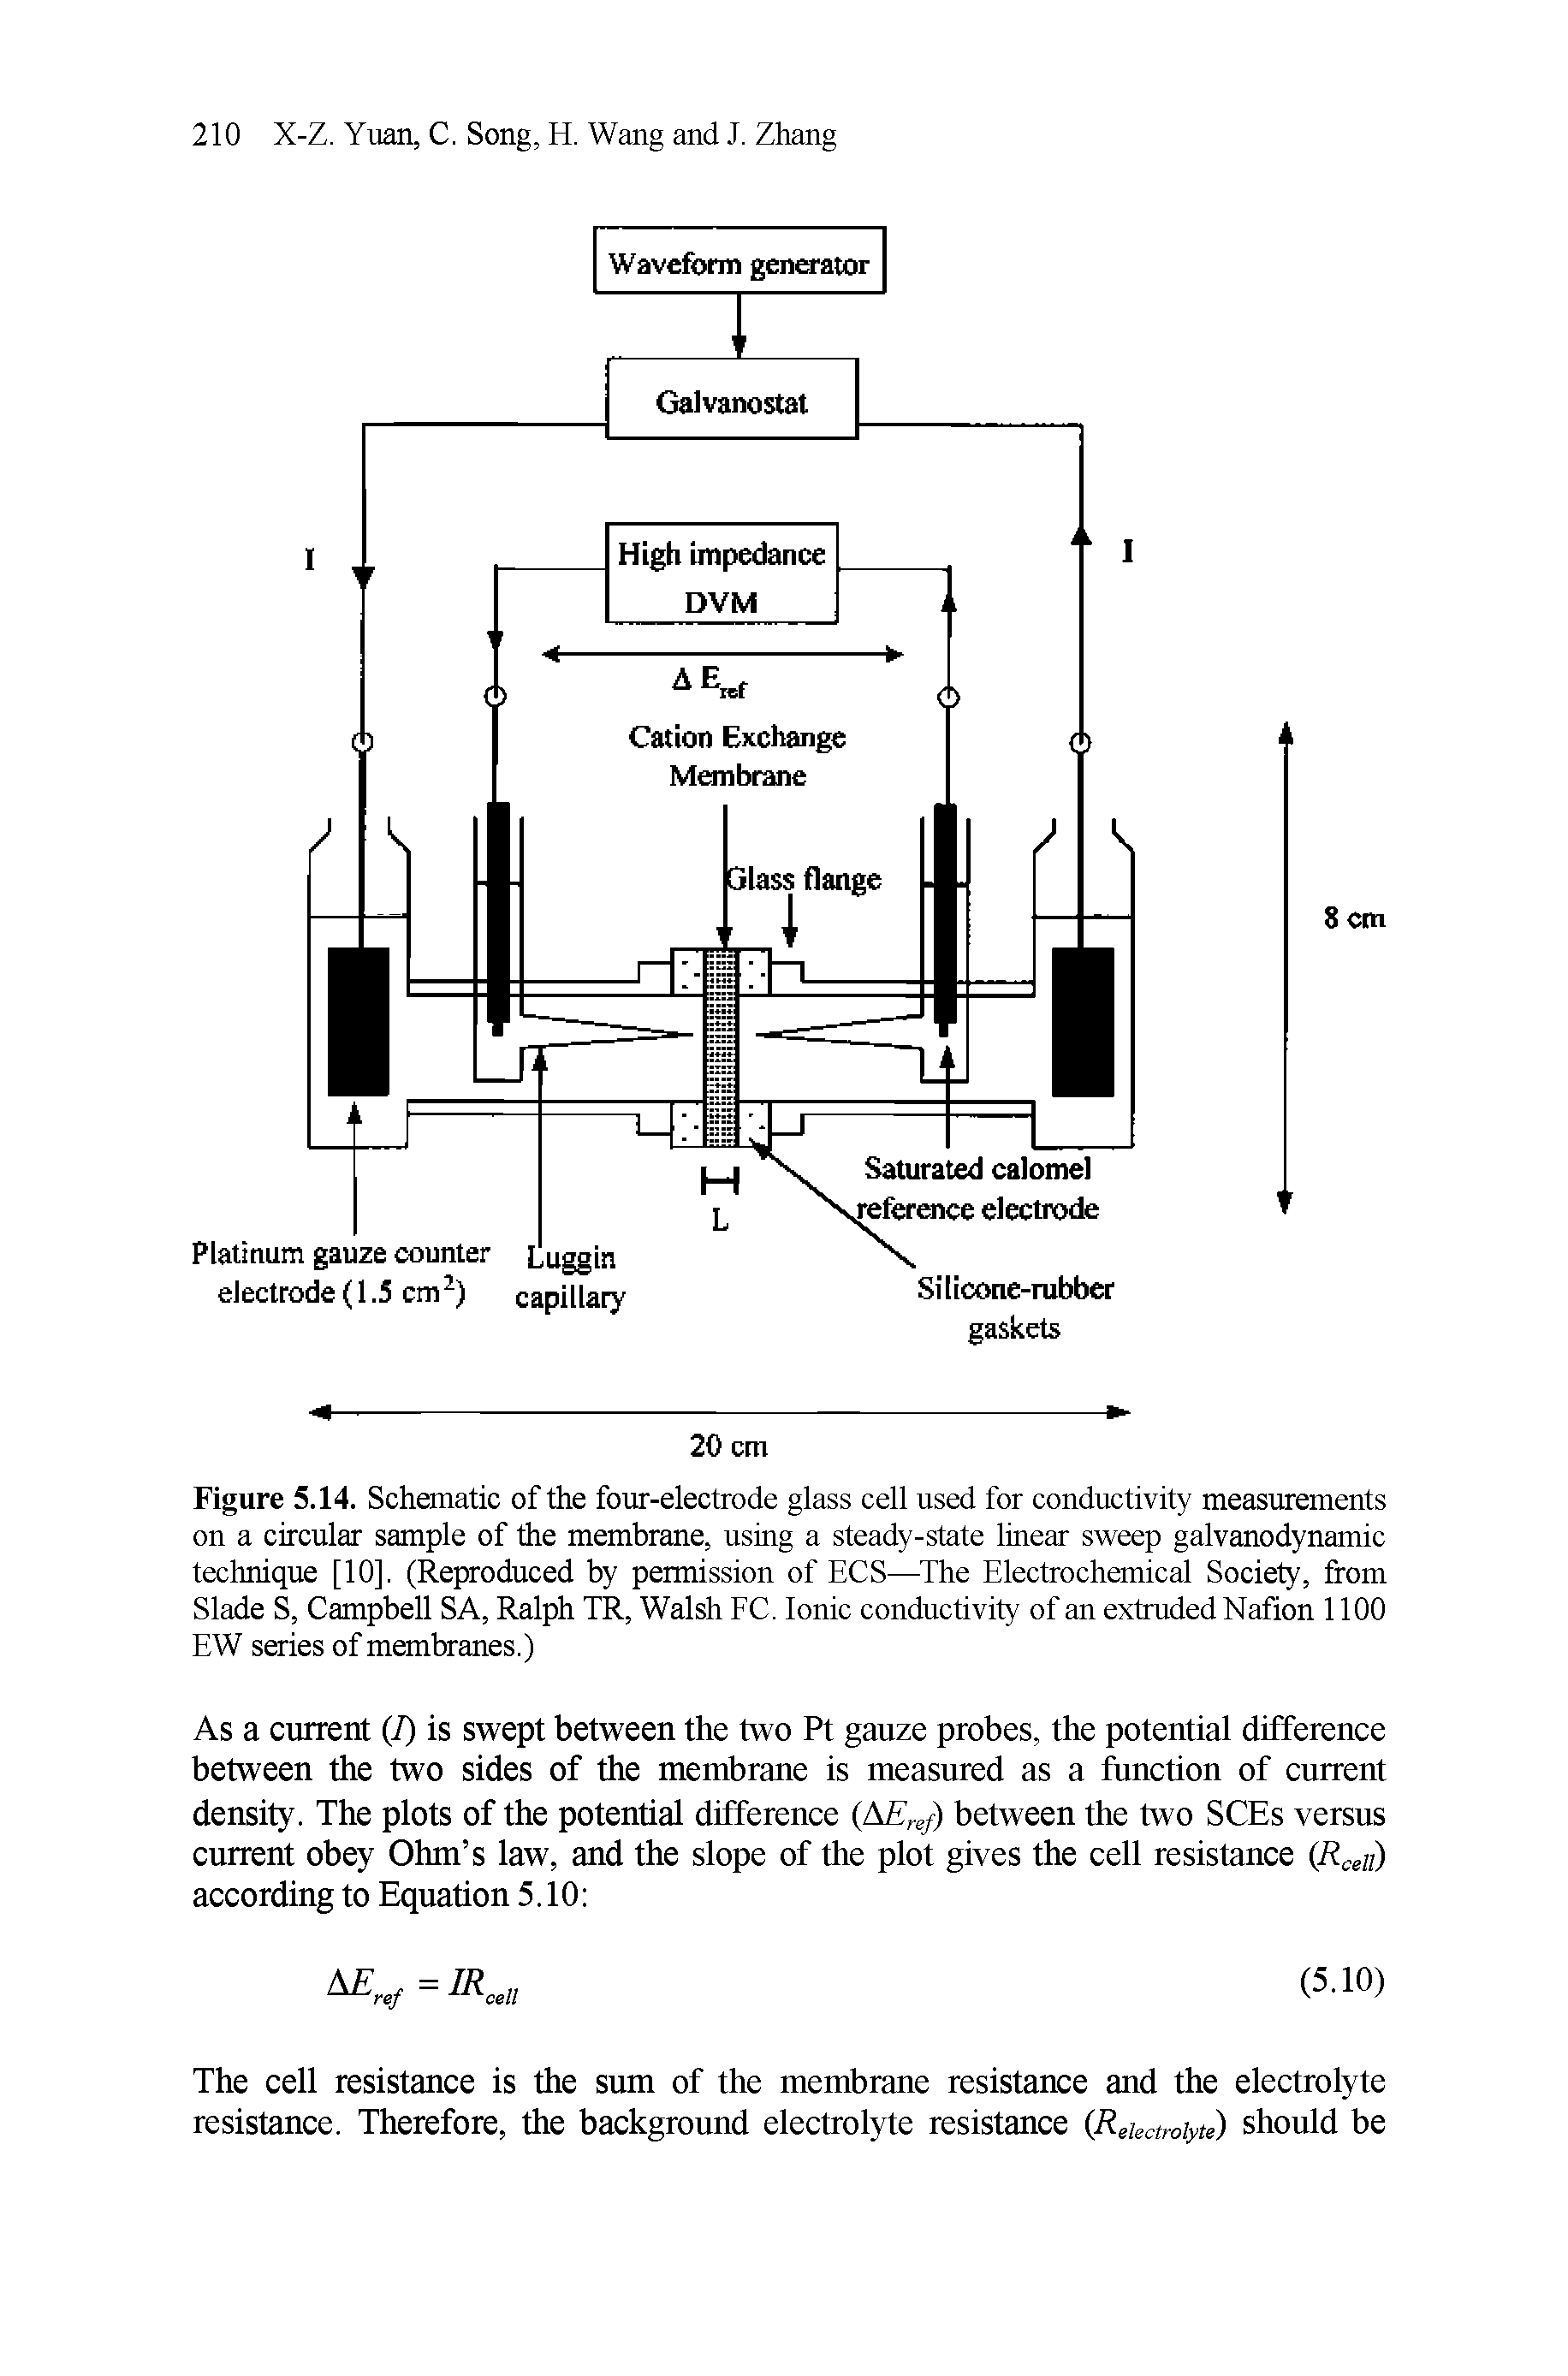 Figure 5.14. Schematic of the four-electrode glass cell used for conductivity measurements on a circular sample of the membrane, using a steady-state linear sweep galvanodynamic technique [10], (Reproduced by permission of ECS—The Electrochemical Society, from Slade S, Campbell SA, Ralph TR, Walsh FC. Ionic conductivity of an extruded Nafion 1100 EW series of membranes.)...